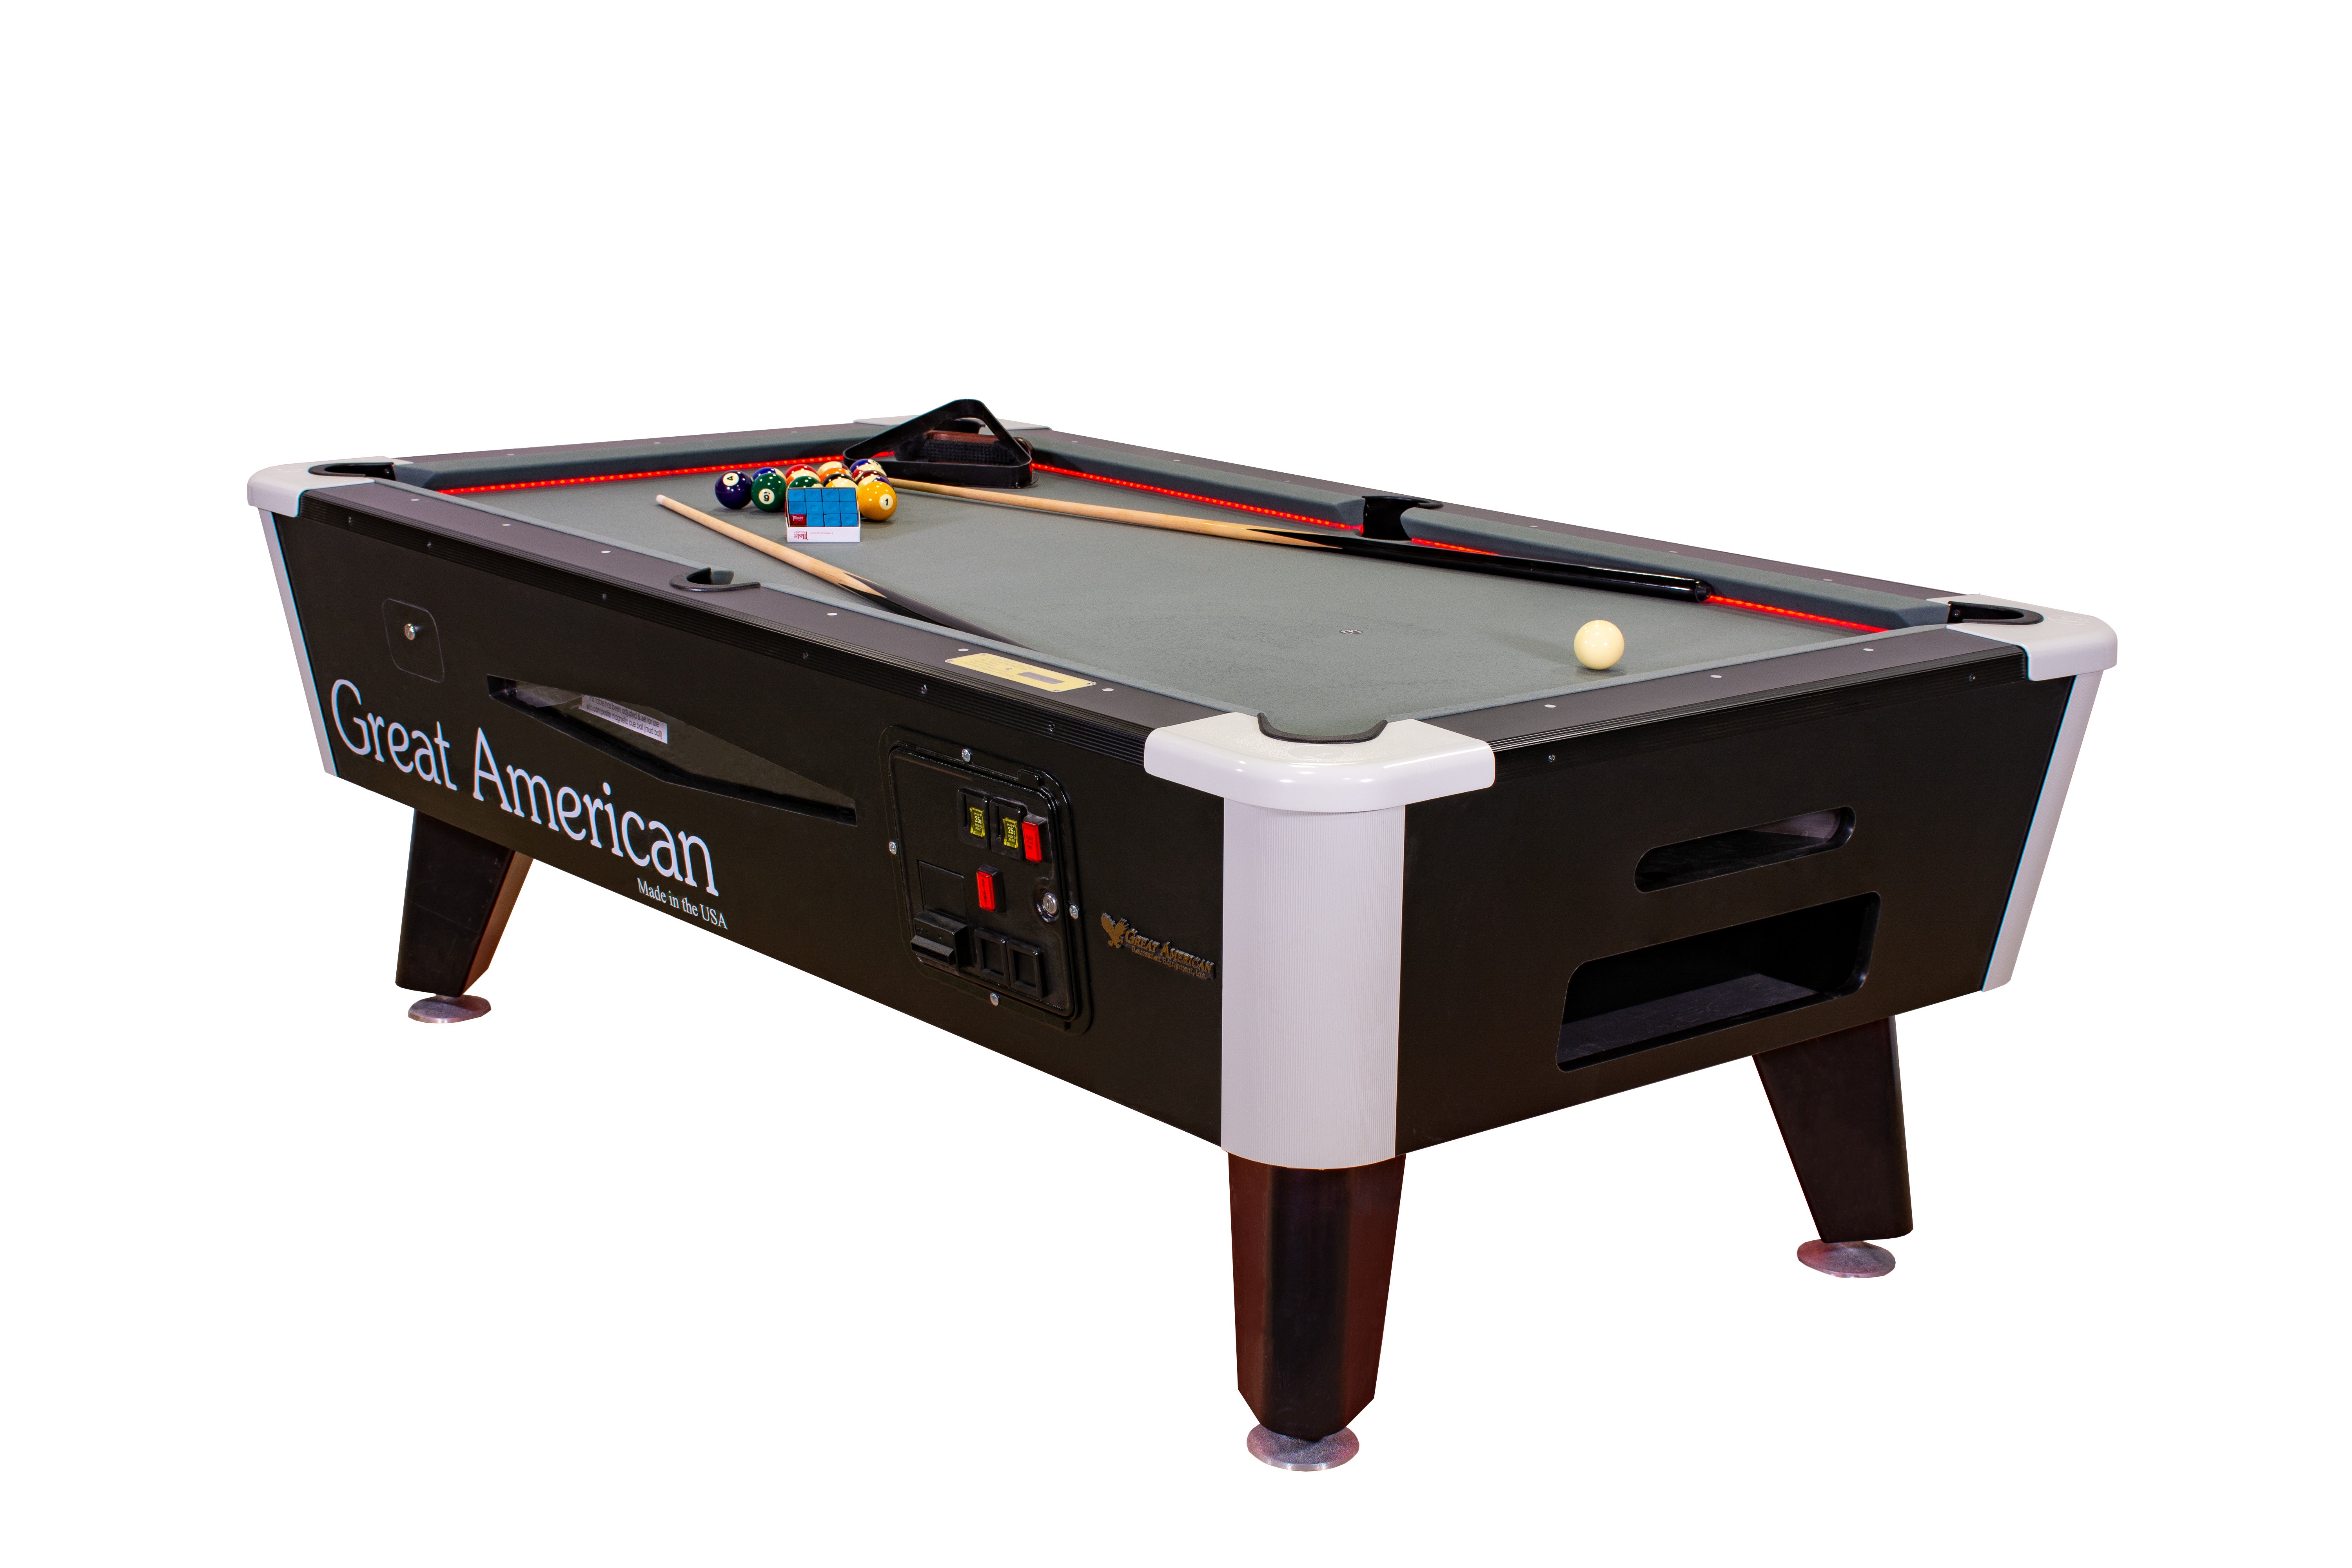 Great American Black Diamond 12V DC Coin Operated Pool Table